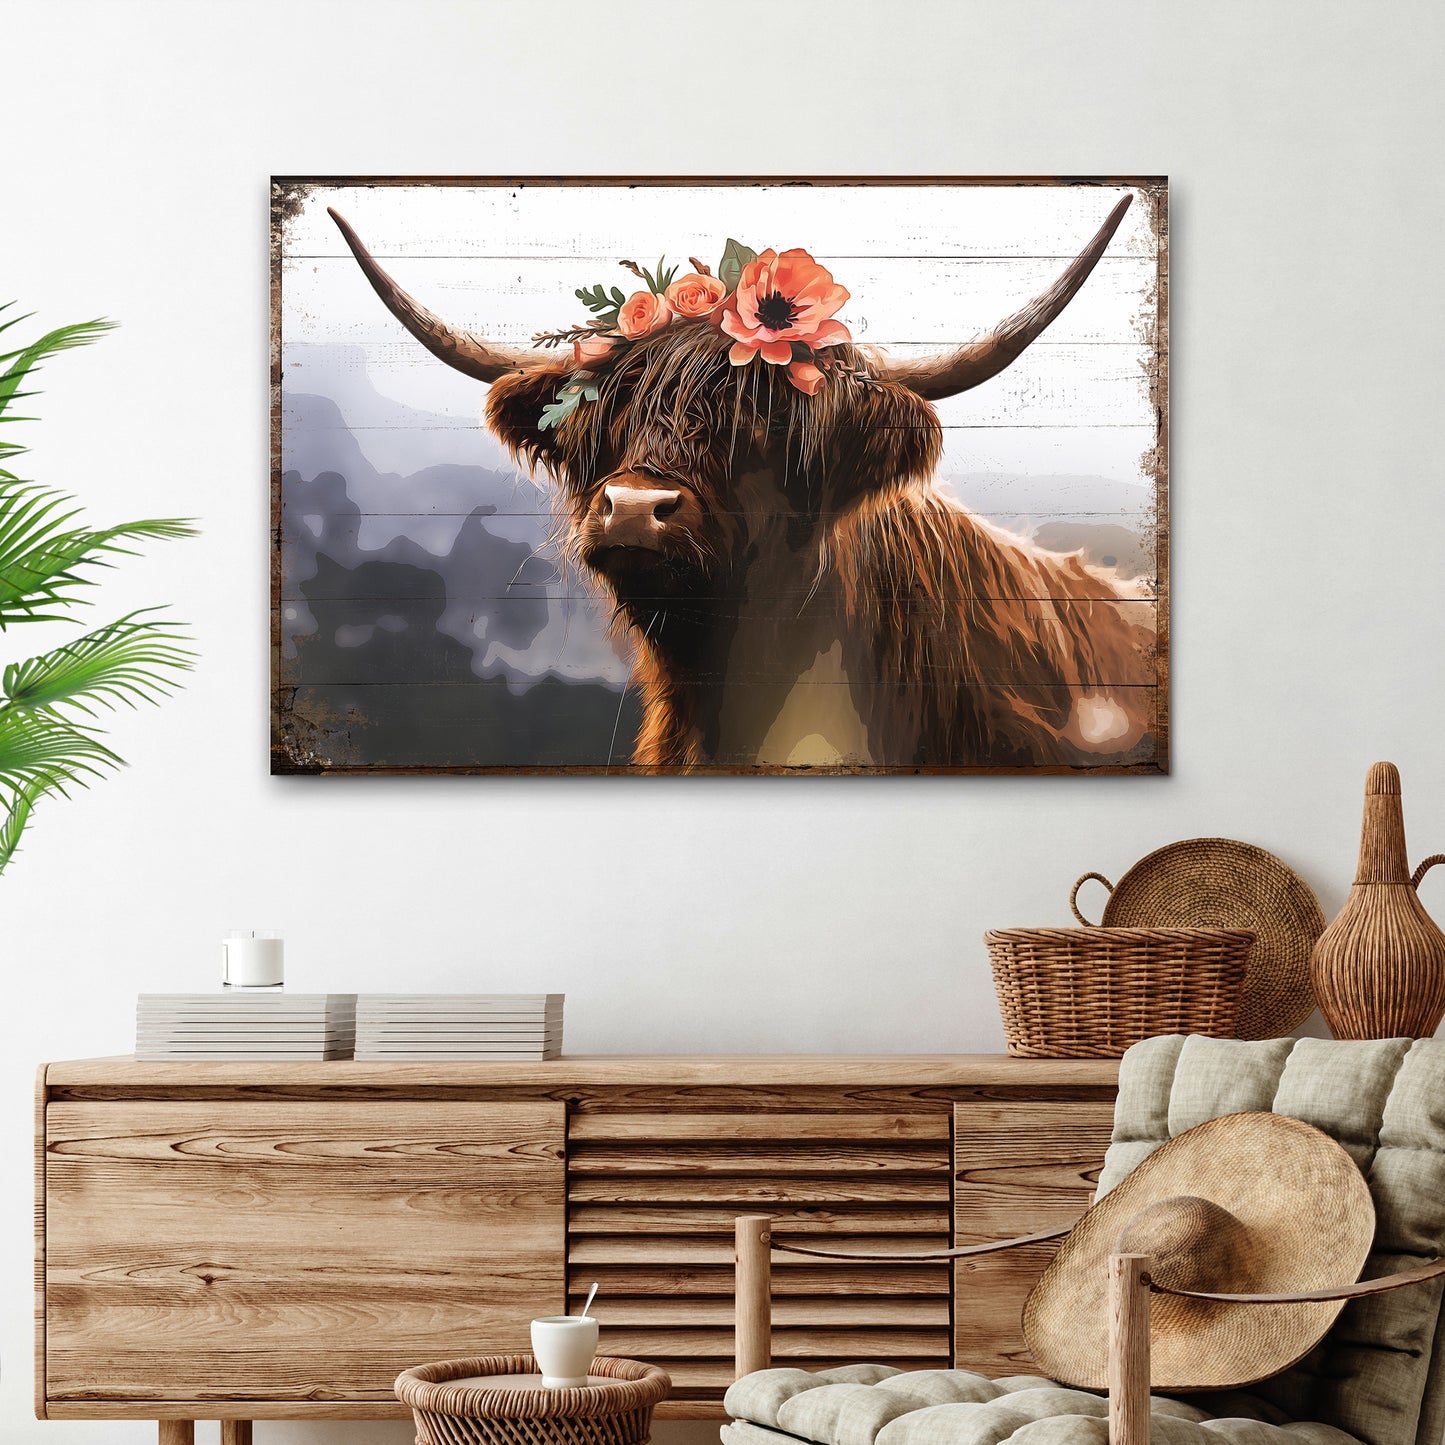 Pretty Highland Retro Canvas Wall Art Style 2 - Image by Tailored Canvases